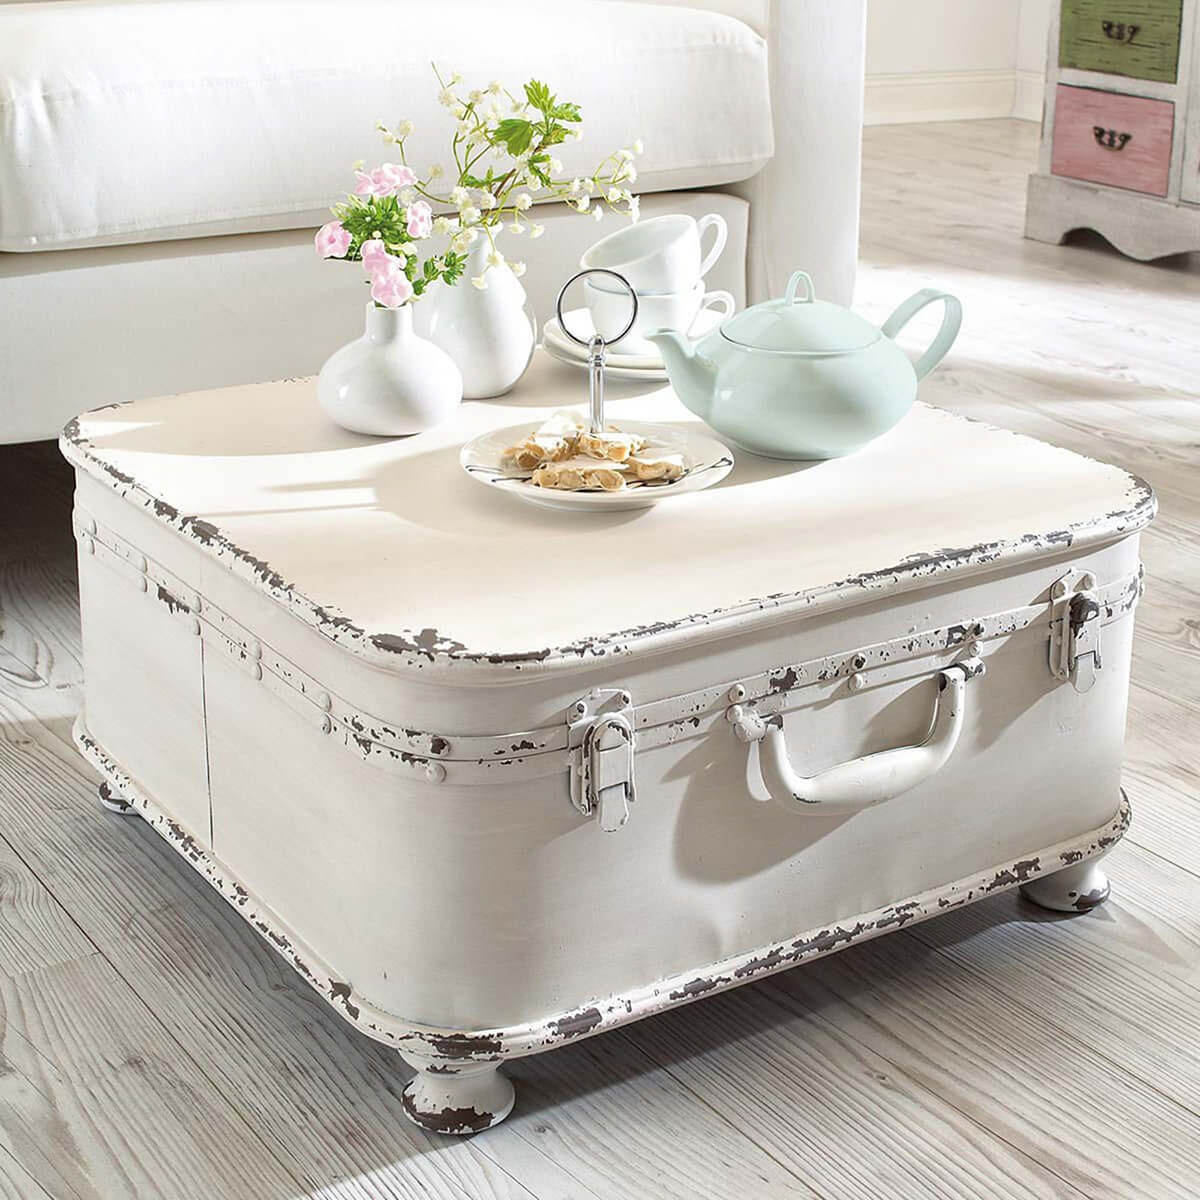 Large White Trunk with Tea Set